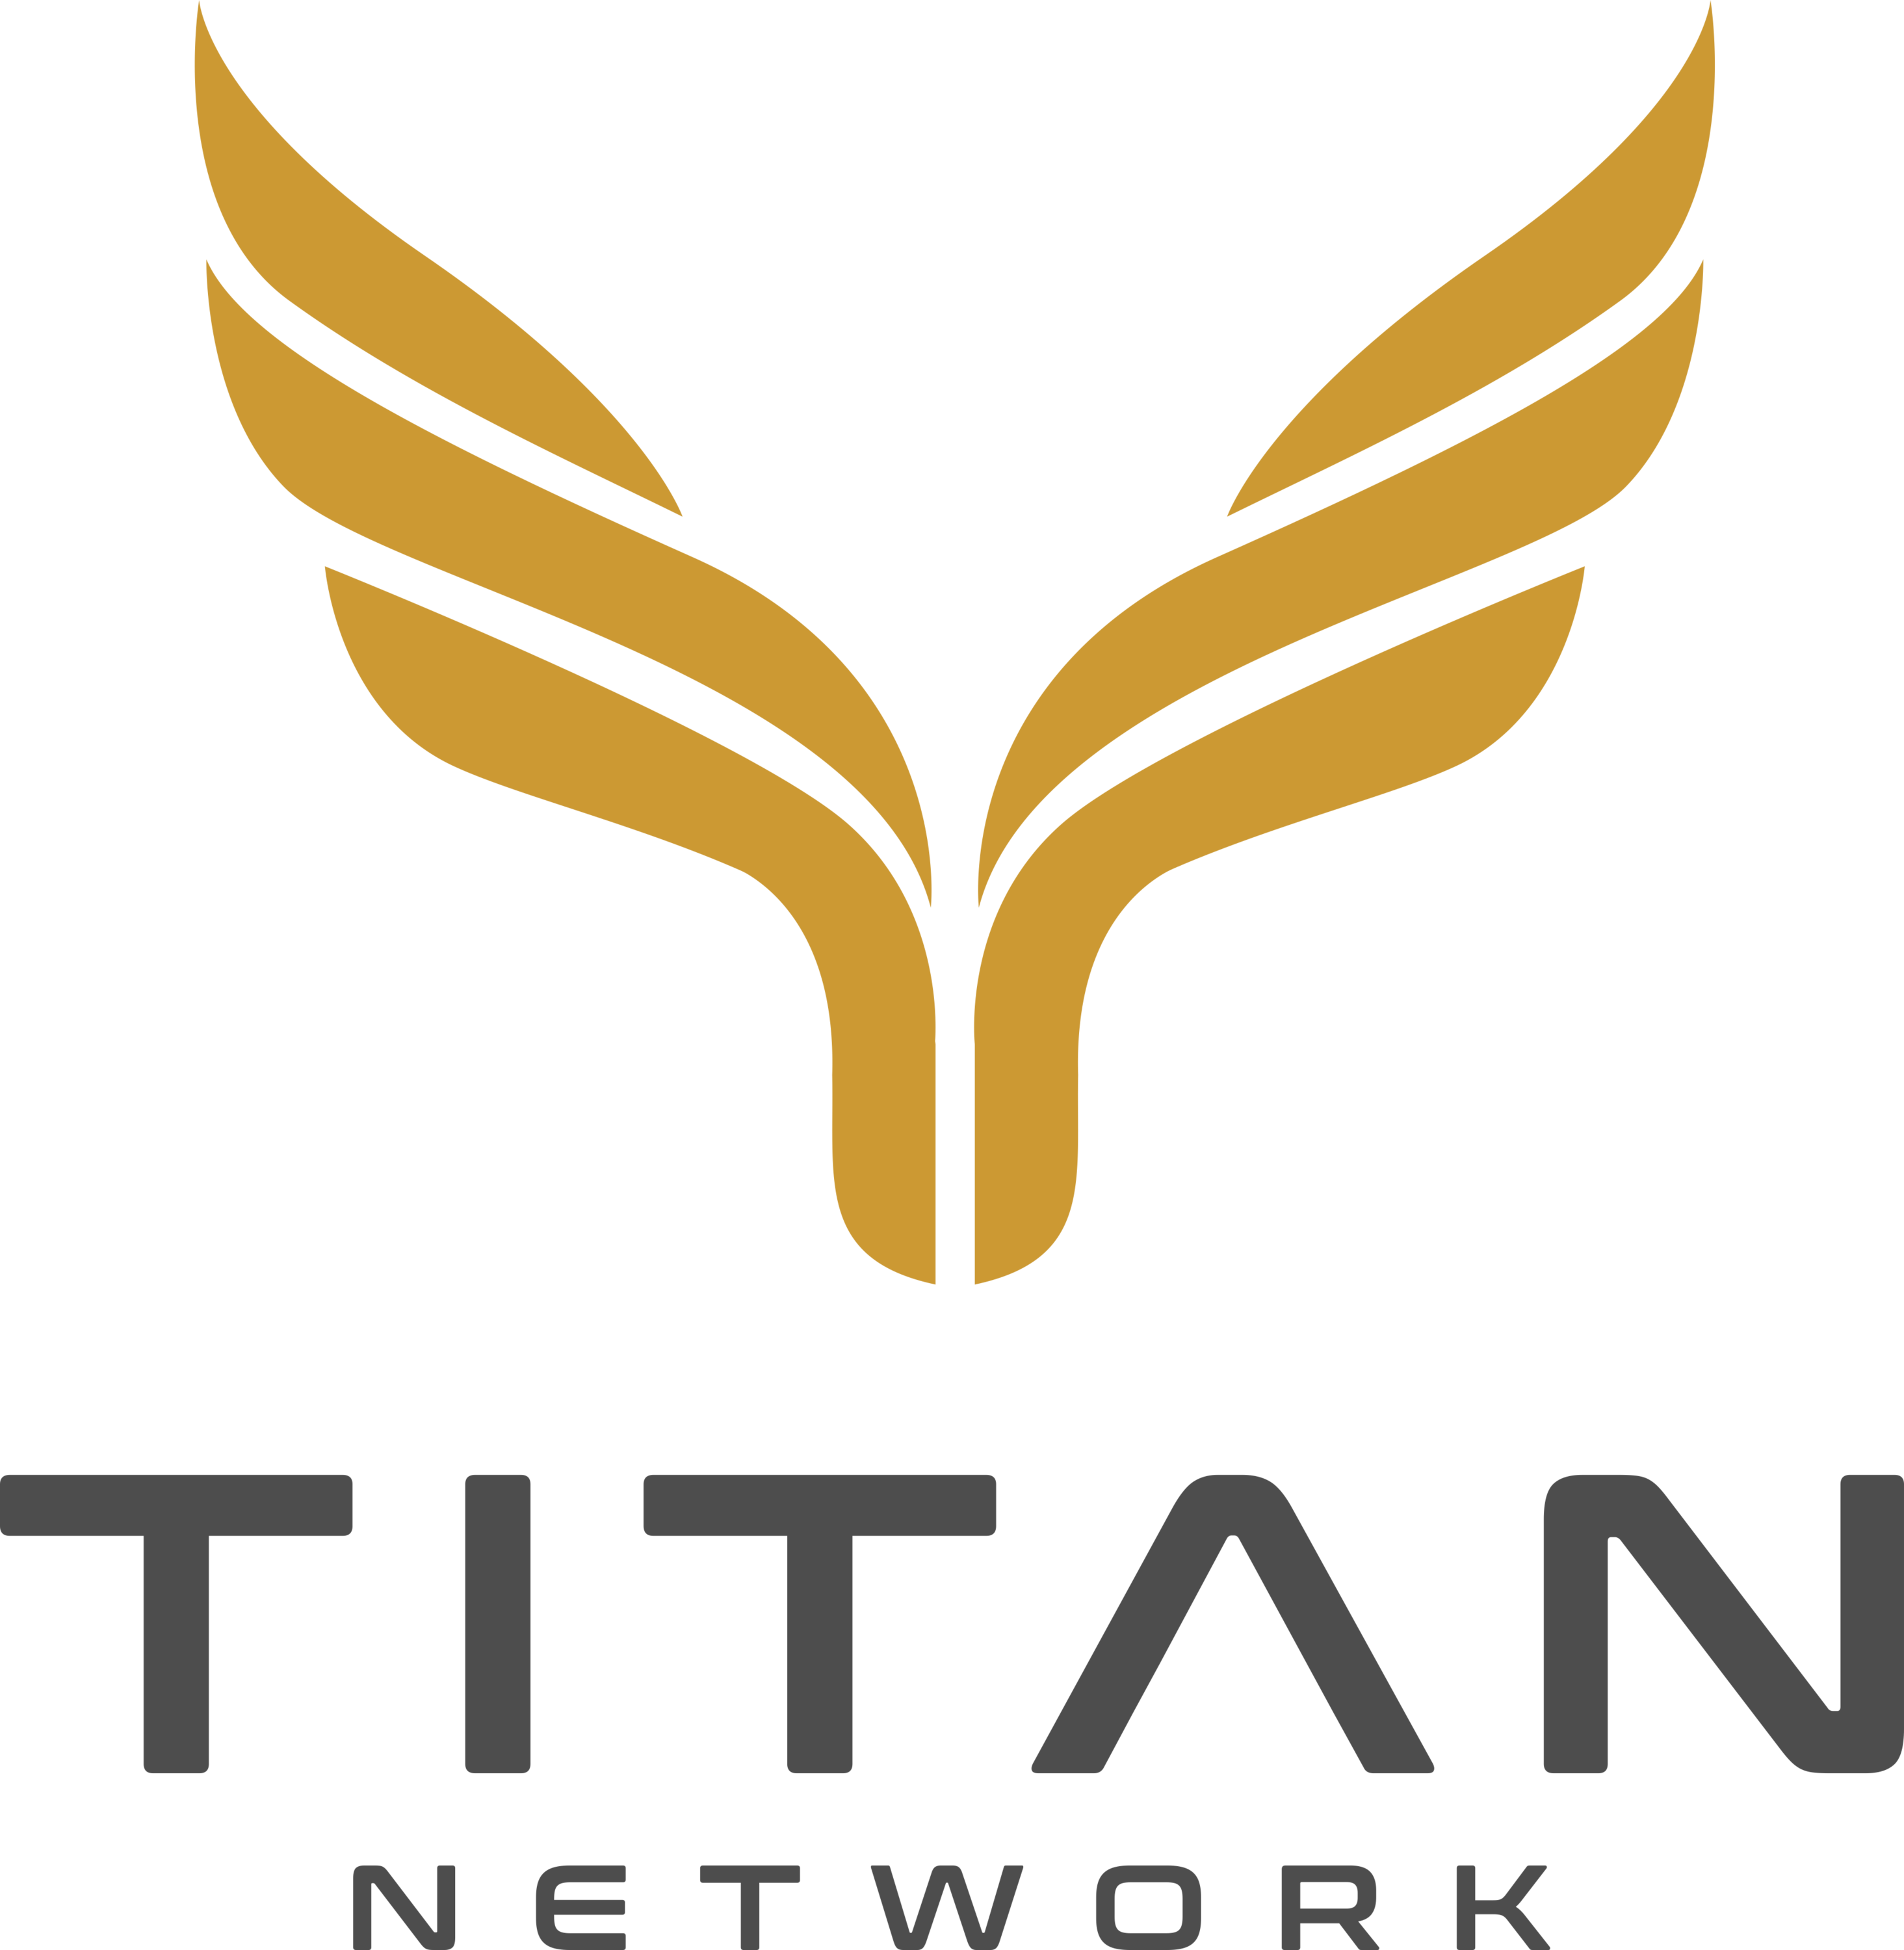 Titan Network Announces Series of Free Monthly Meetup Networking Events, Titans of Amazon FBA